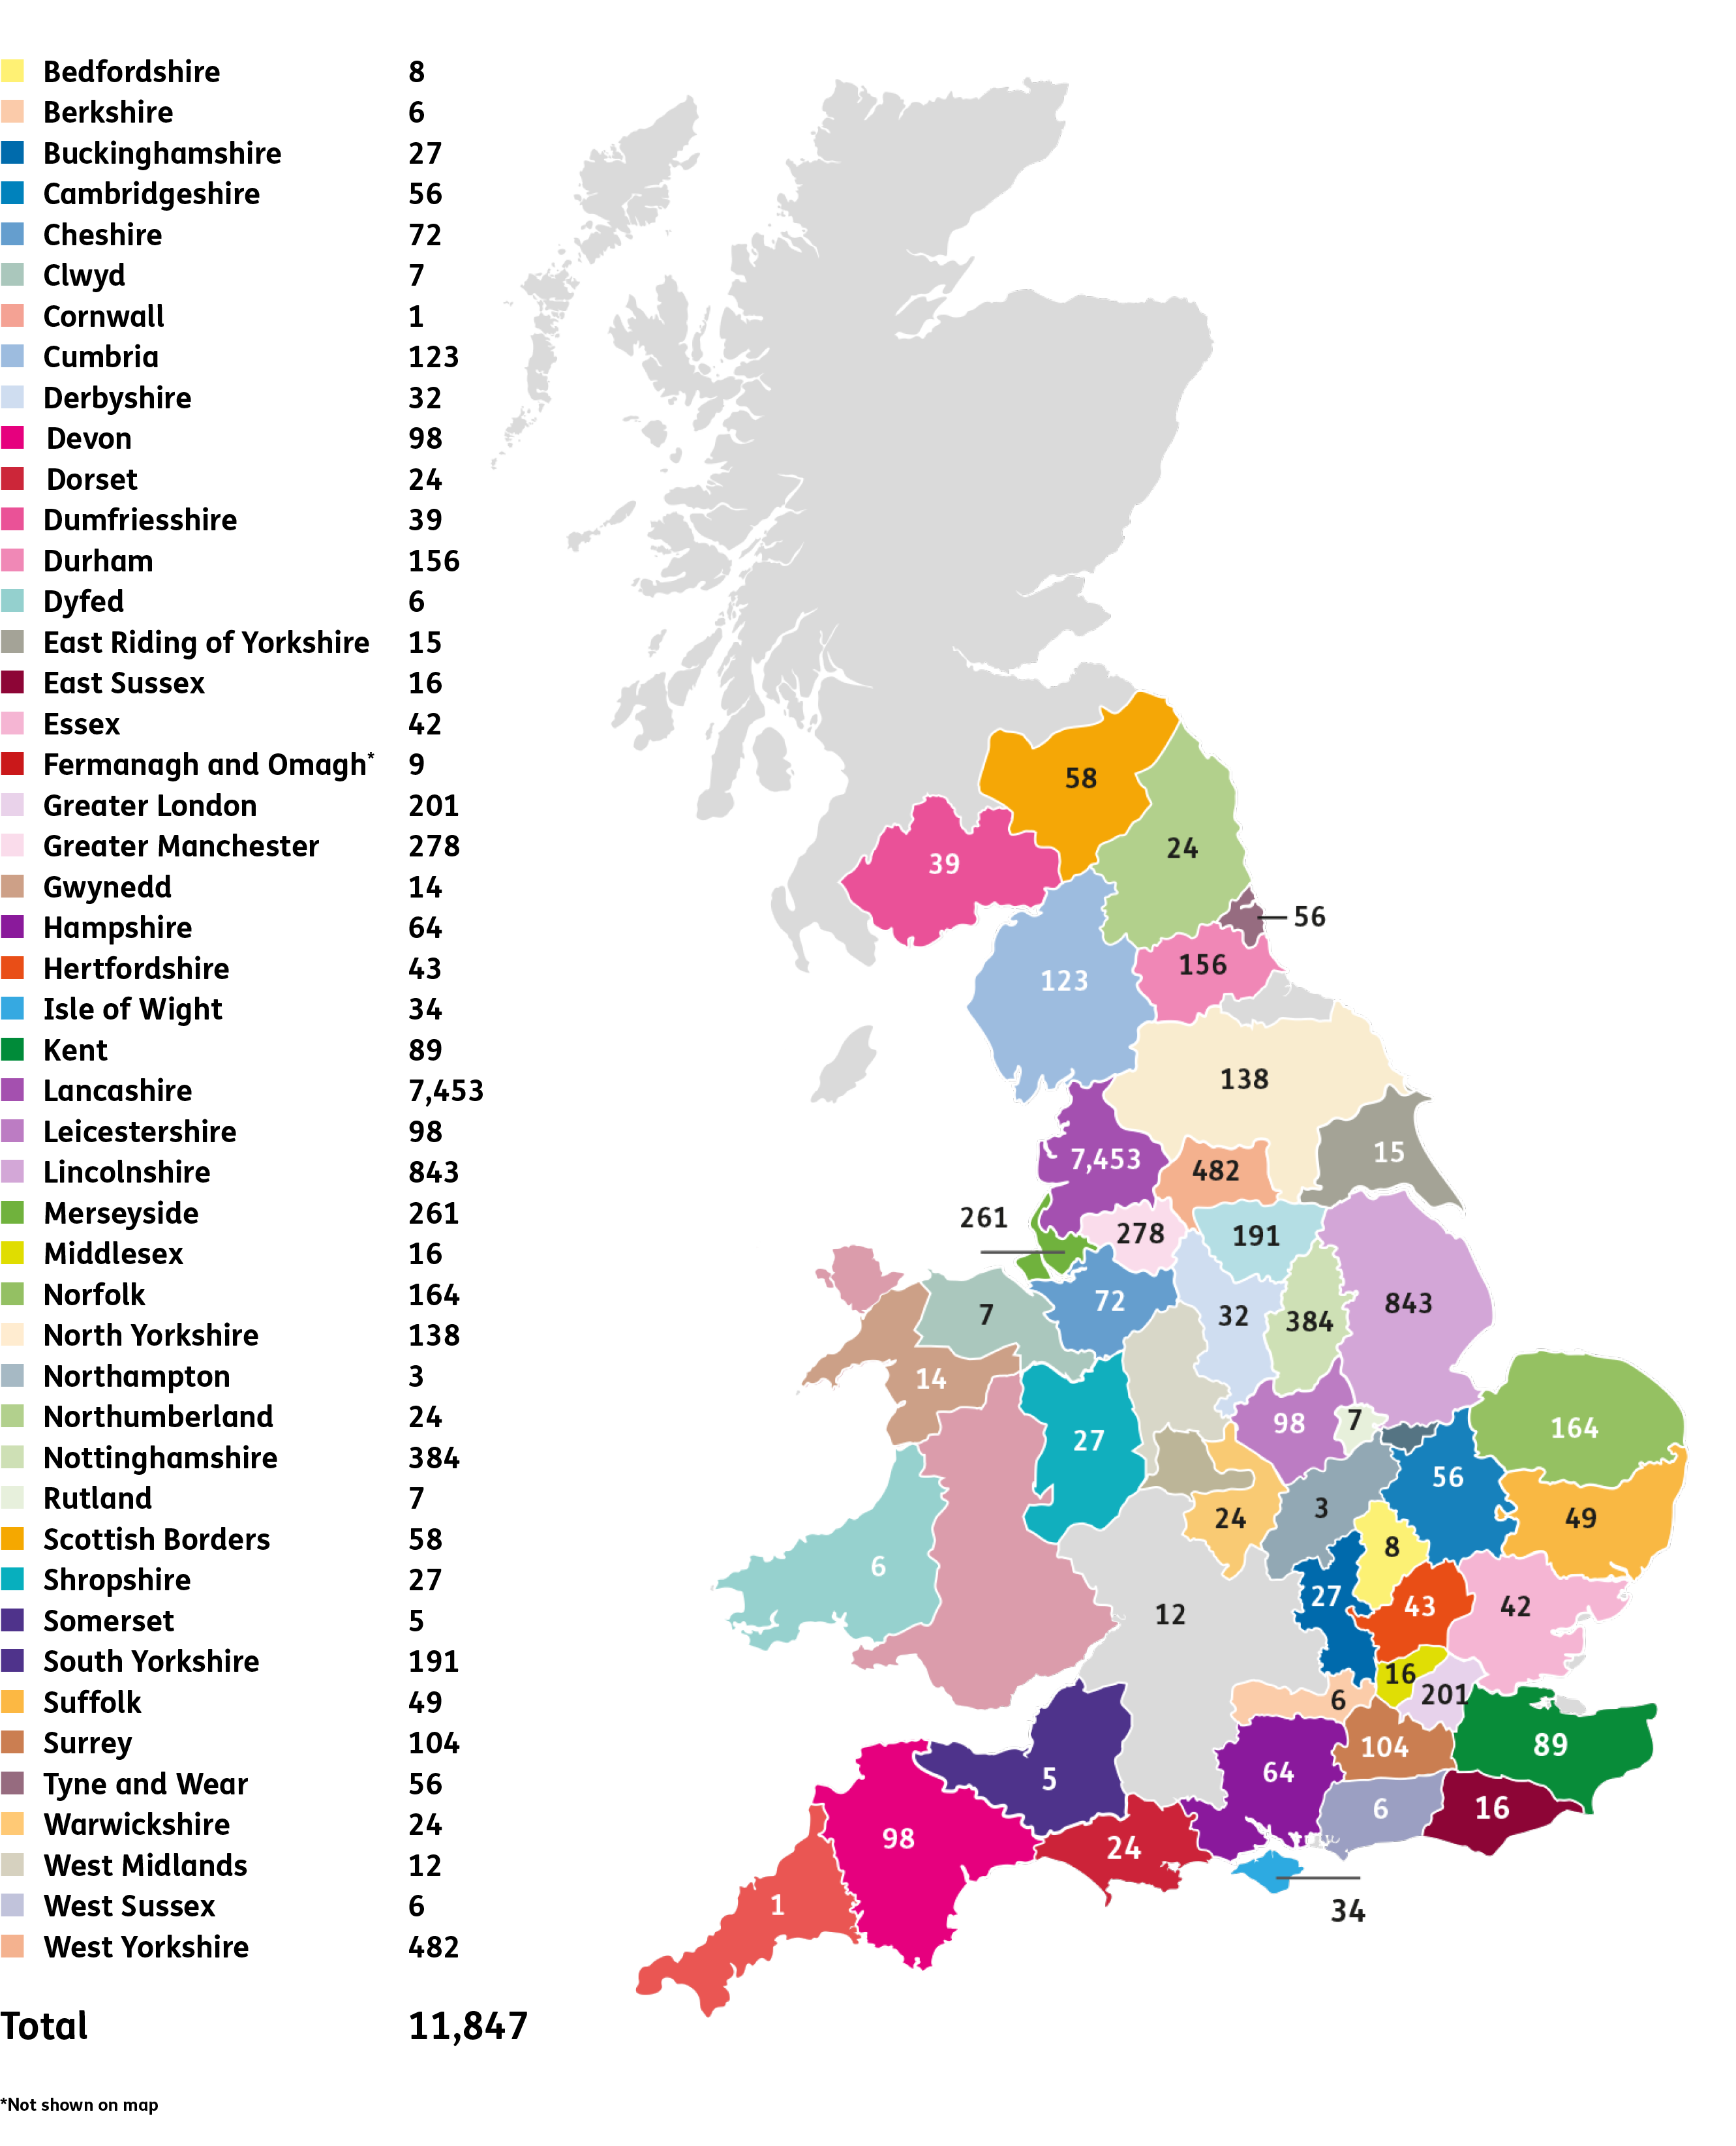 UK map with the number of homes Progress has in each area of the UK